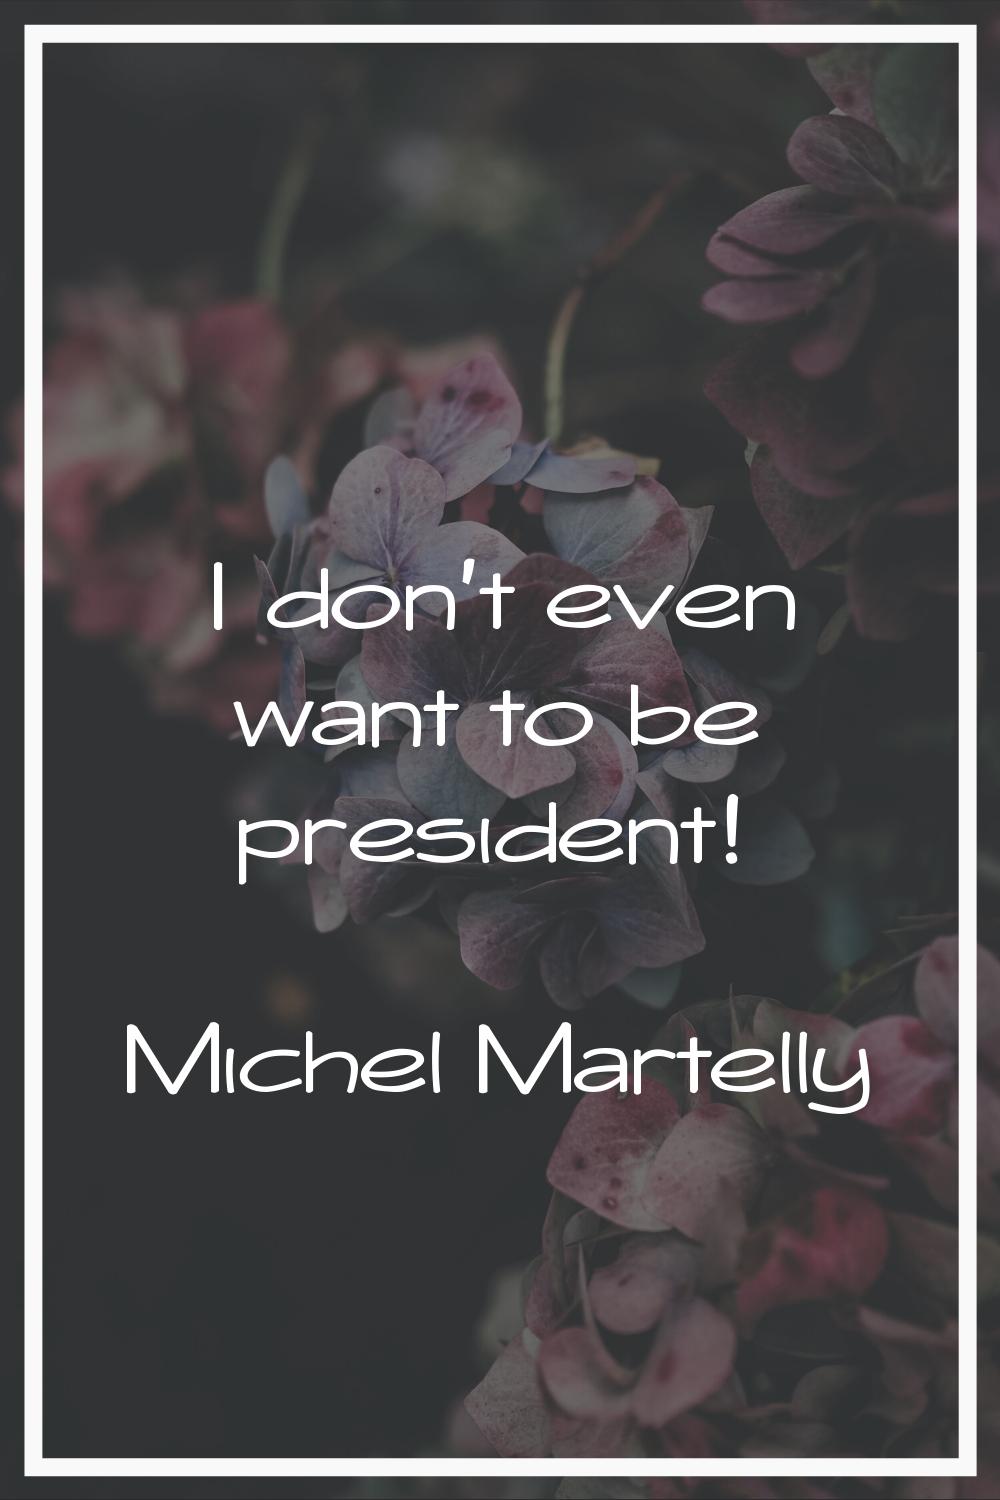 I don't even want to be president!